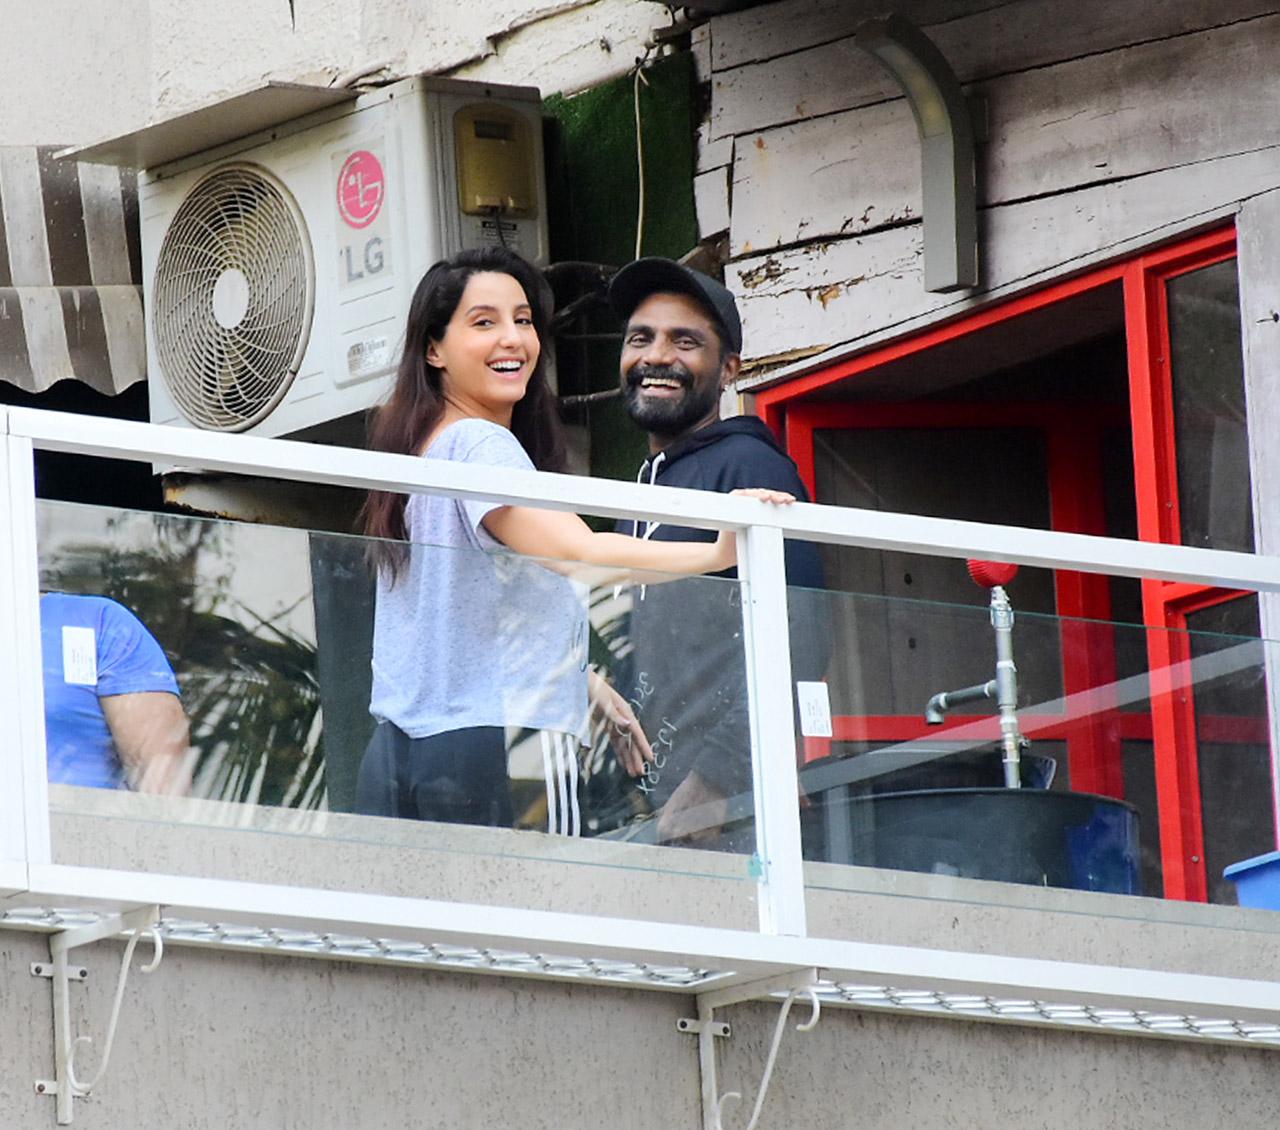 Nora Fatehi dropped by choreographer-director Remo D'Souza's office in Andheri. This is Remo's first public appearance after he suffered a heart attack in December.